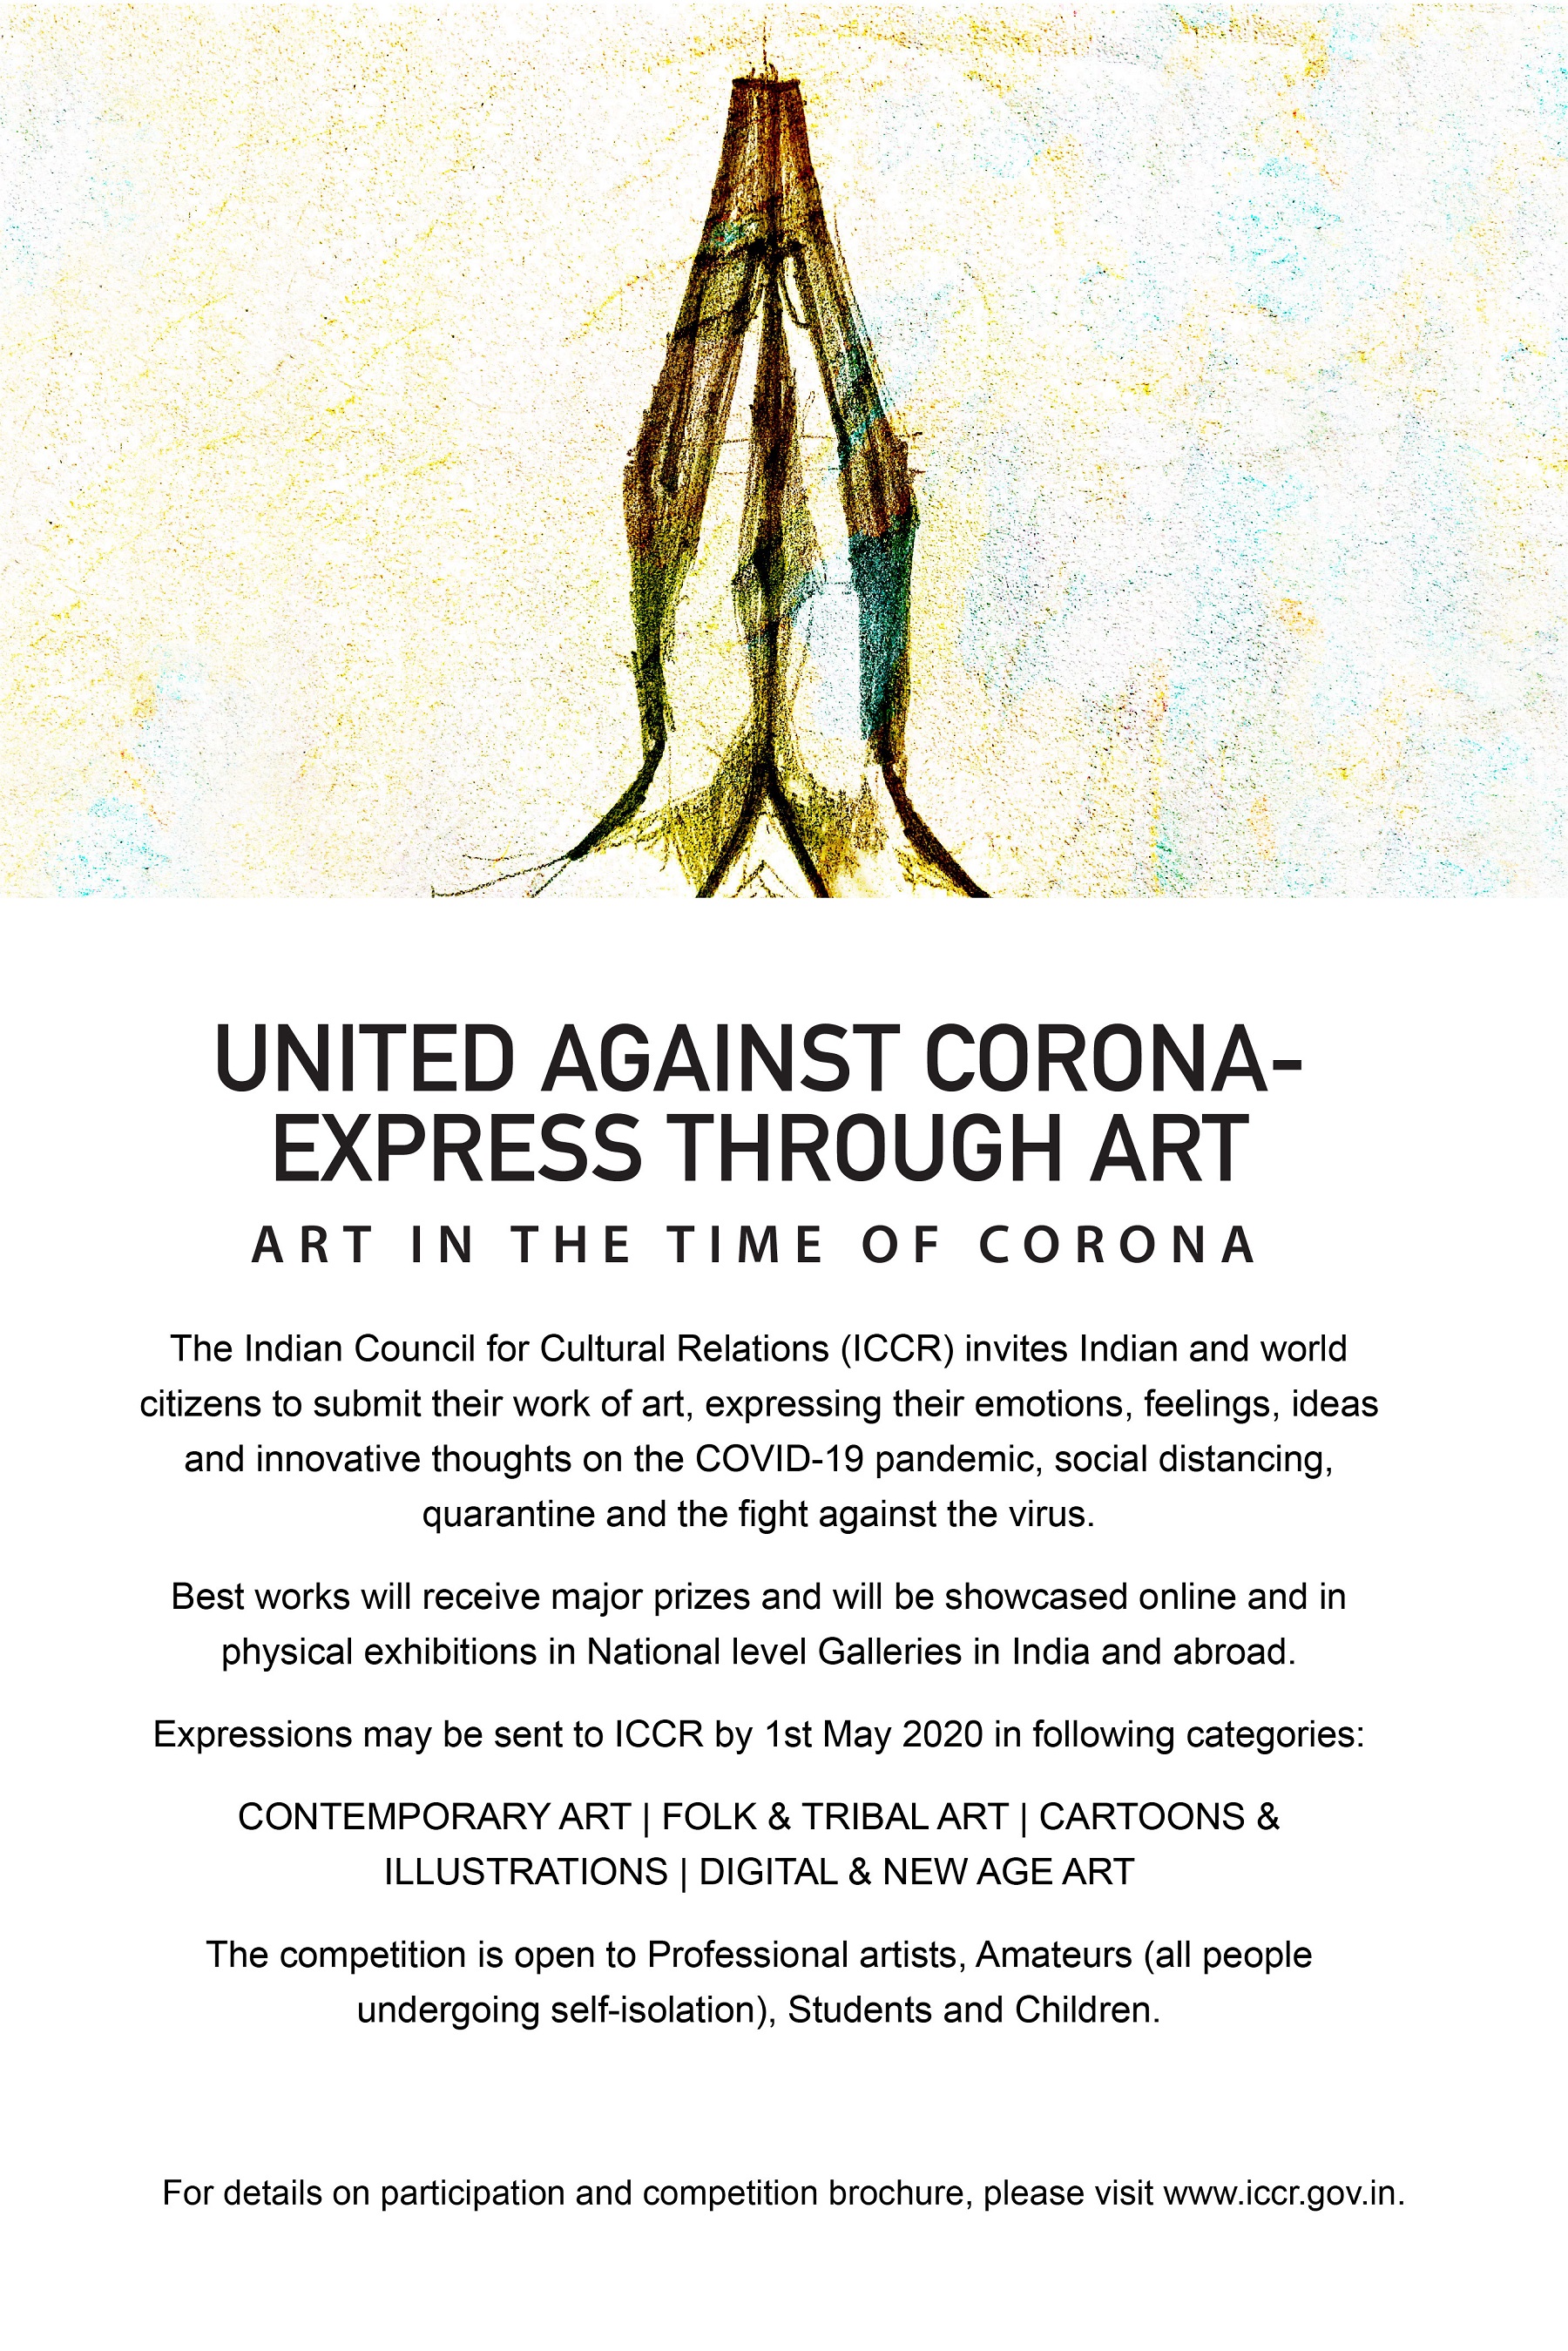 ICCR launches a global painting competition “United Against CORONA- Express Through Art”